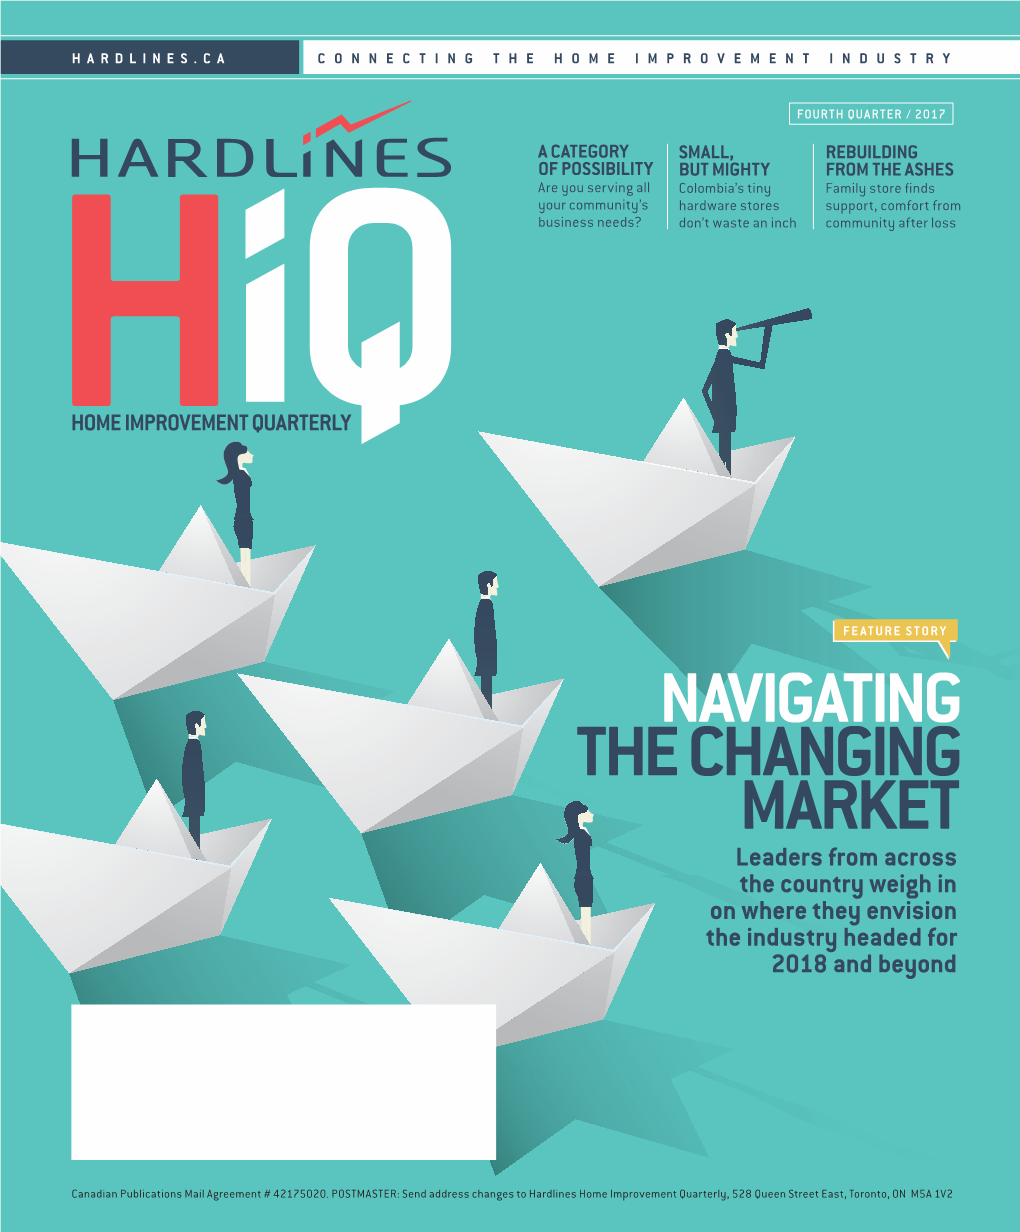 NAVIGATING the CHANGING MARKET Leaders from Across the Country Weigh in on Where They Envision the Industry Headed for 2018 and Beyond